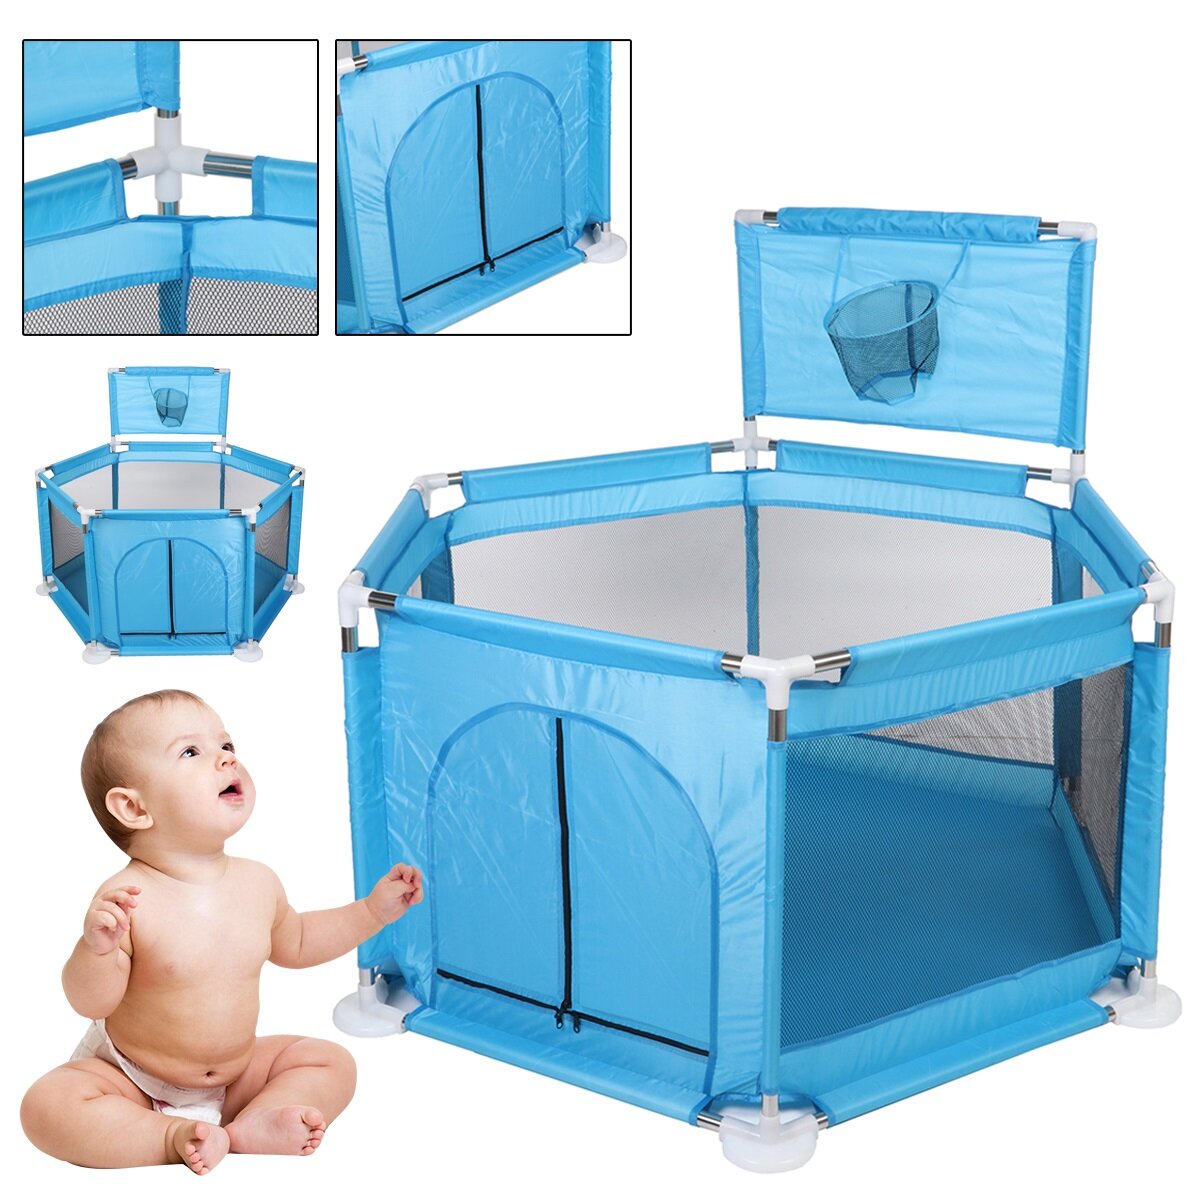 Baby Portable Children's Playpen Folding Child Fence Child Safety Barrier Ball Pool Kids Bed Fence Playpen Dry Pool for